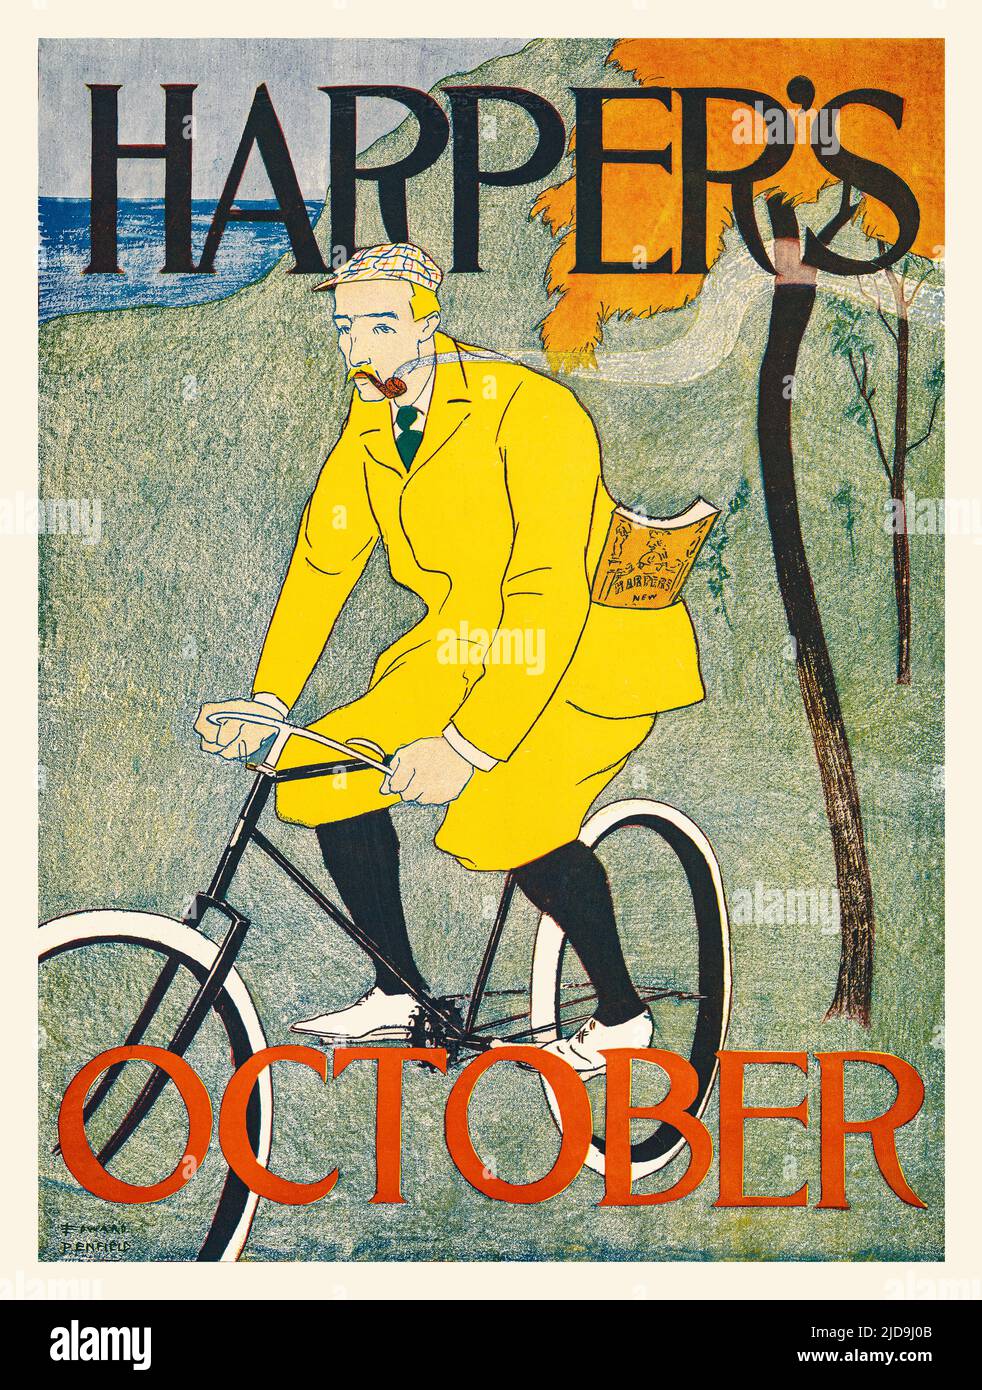 A turn of the 20th century illustration by Edward Penfield (1866-1925) considered by many to be the father of the American poster. Featuring a man cycling in a yellow suit with plus fours and smoking a pipe. Harper’s Magazine, the oldest general-interest monthly in America. Stock Photo